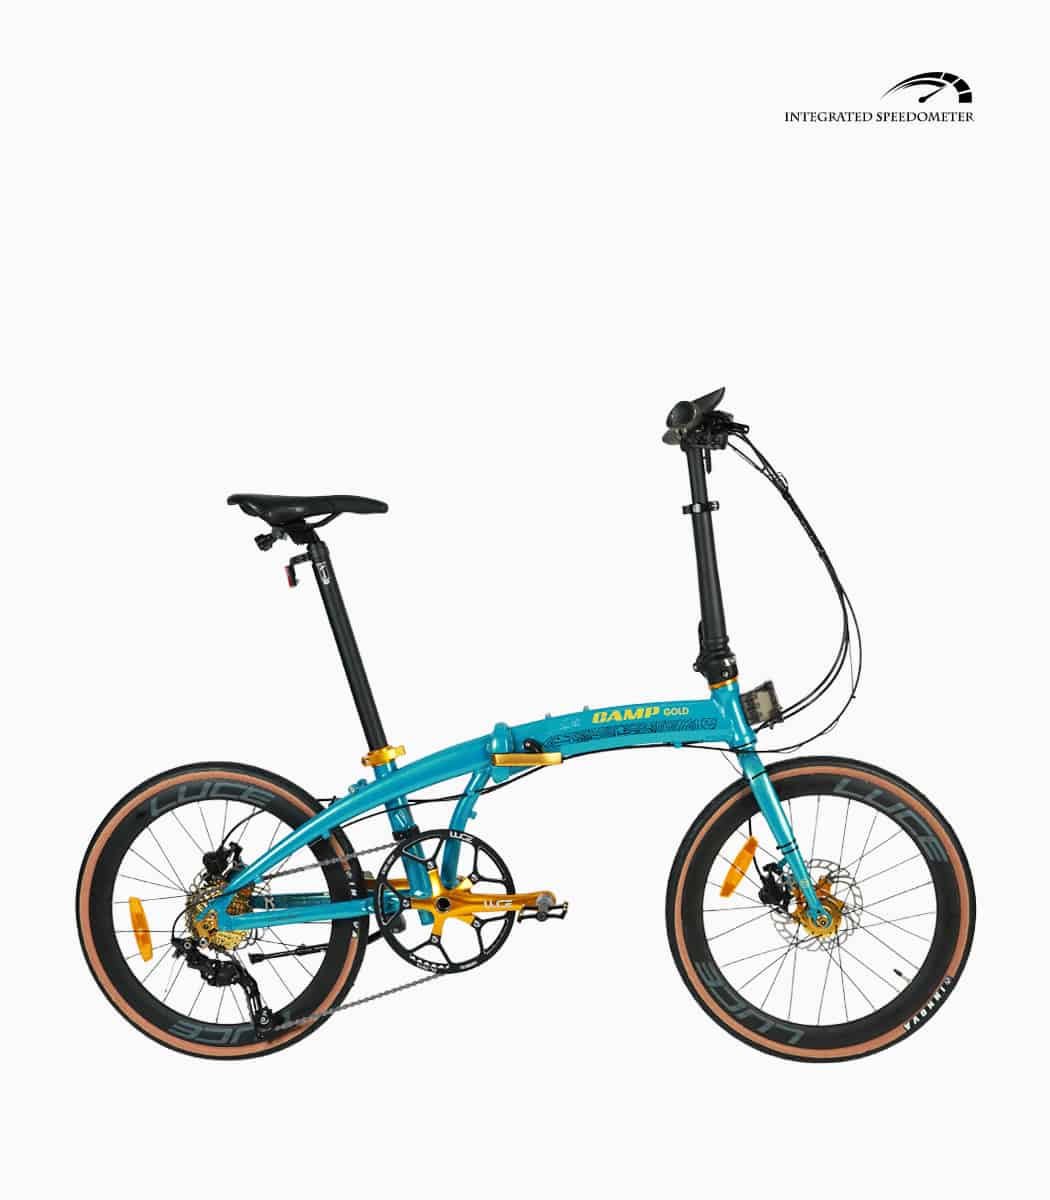 CAMP GOLD Sport (SKY) foldable bicycle with speedometer right